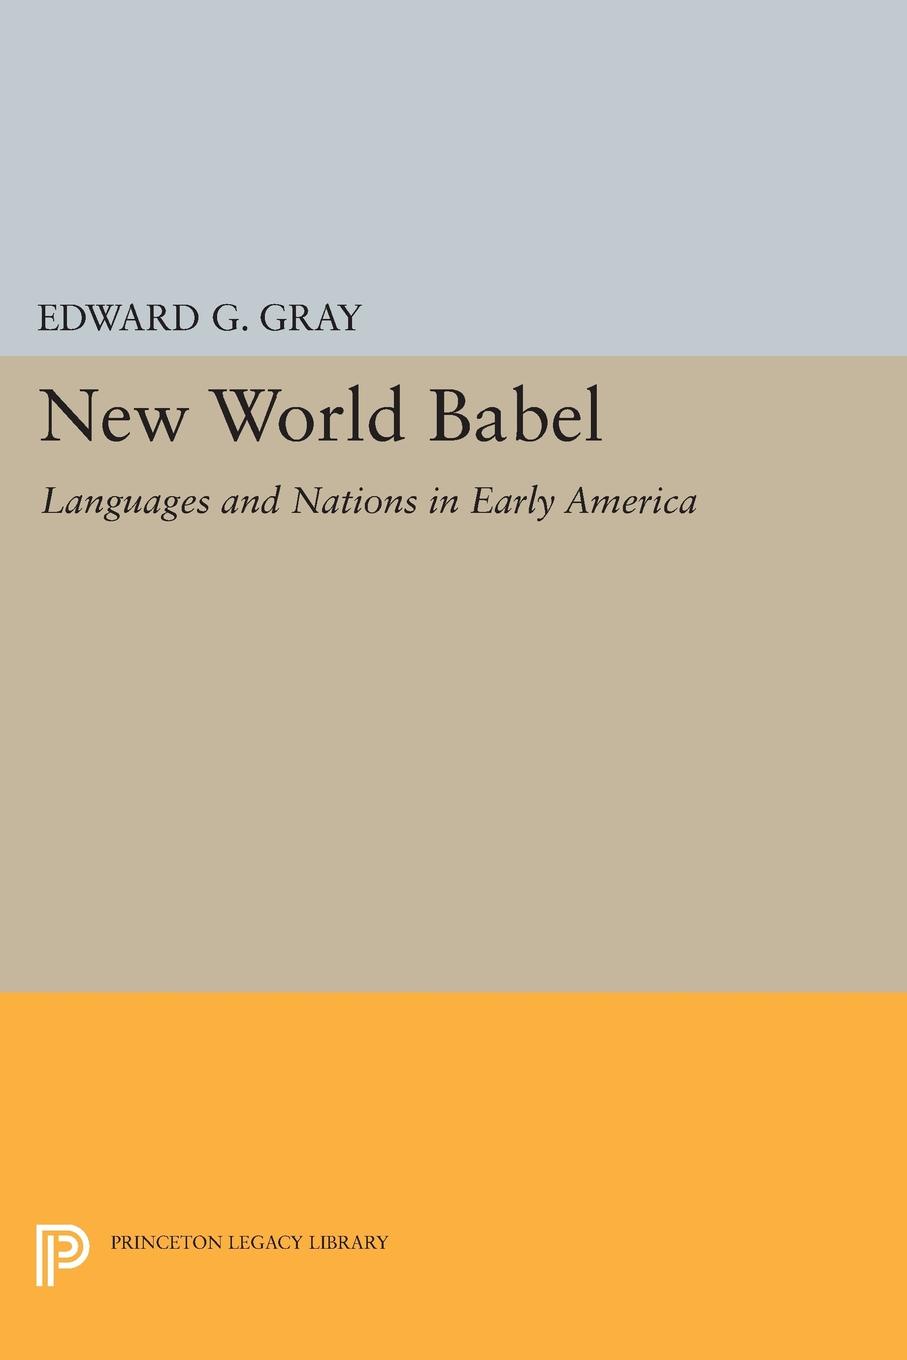 New World Babel. Languages and Nations in Early America